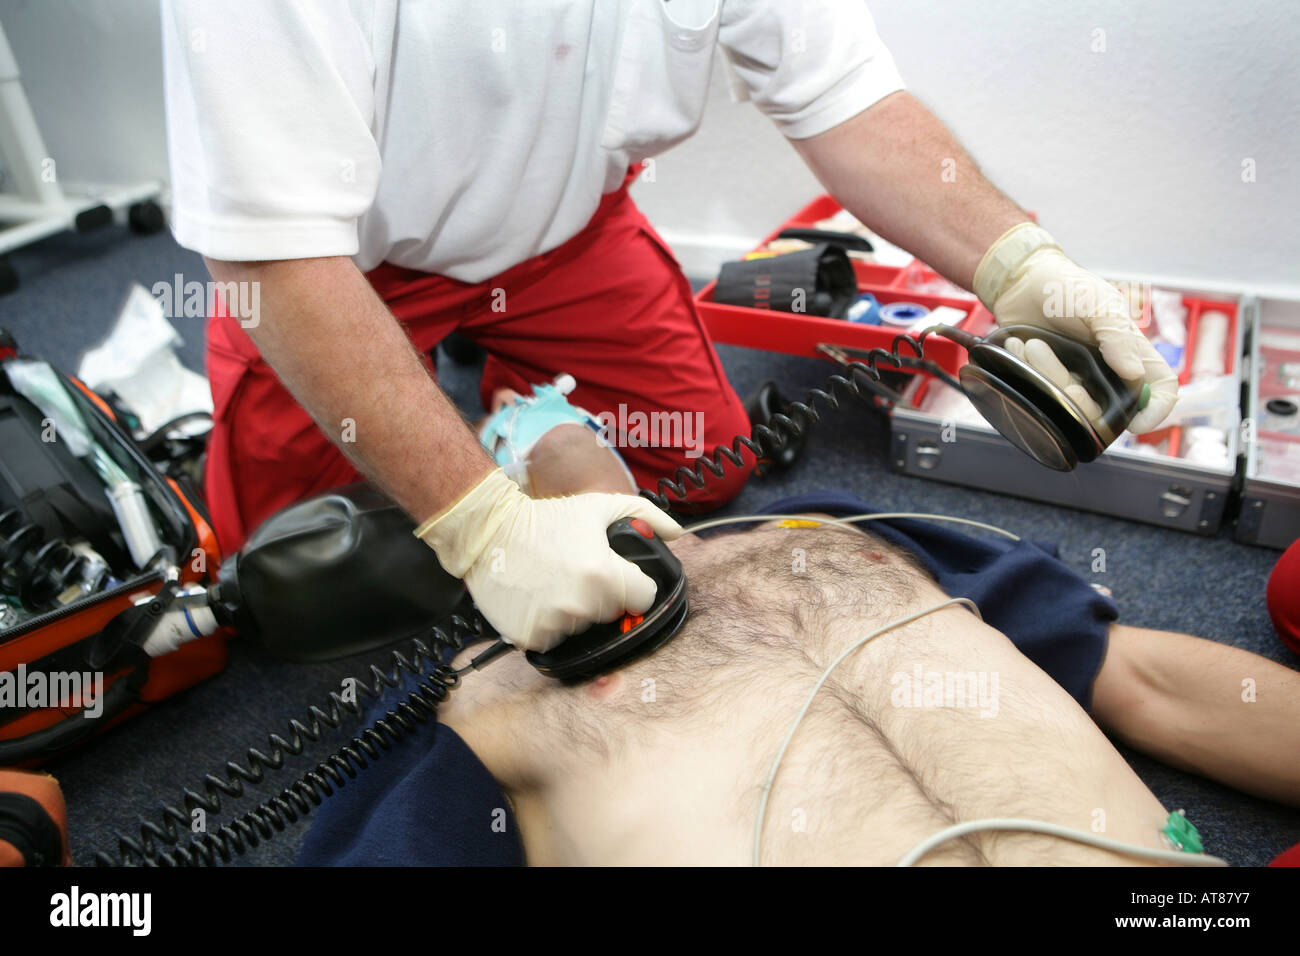 DEU, Germany : Rescue, paramedics in a private home, attempt at resuscitation, after a cardiac arrest. Training situation Stock Photo